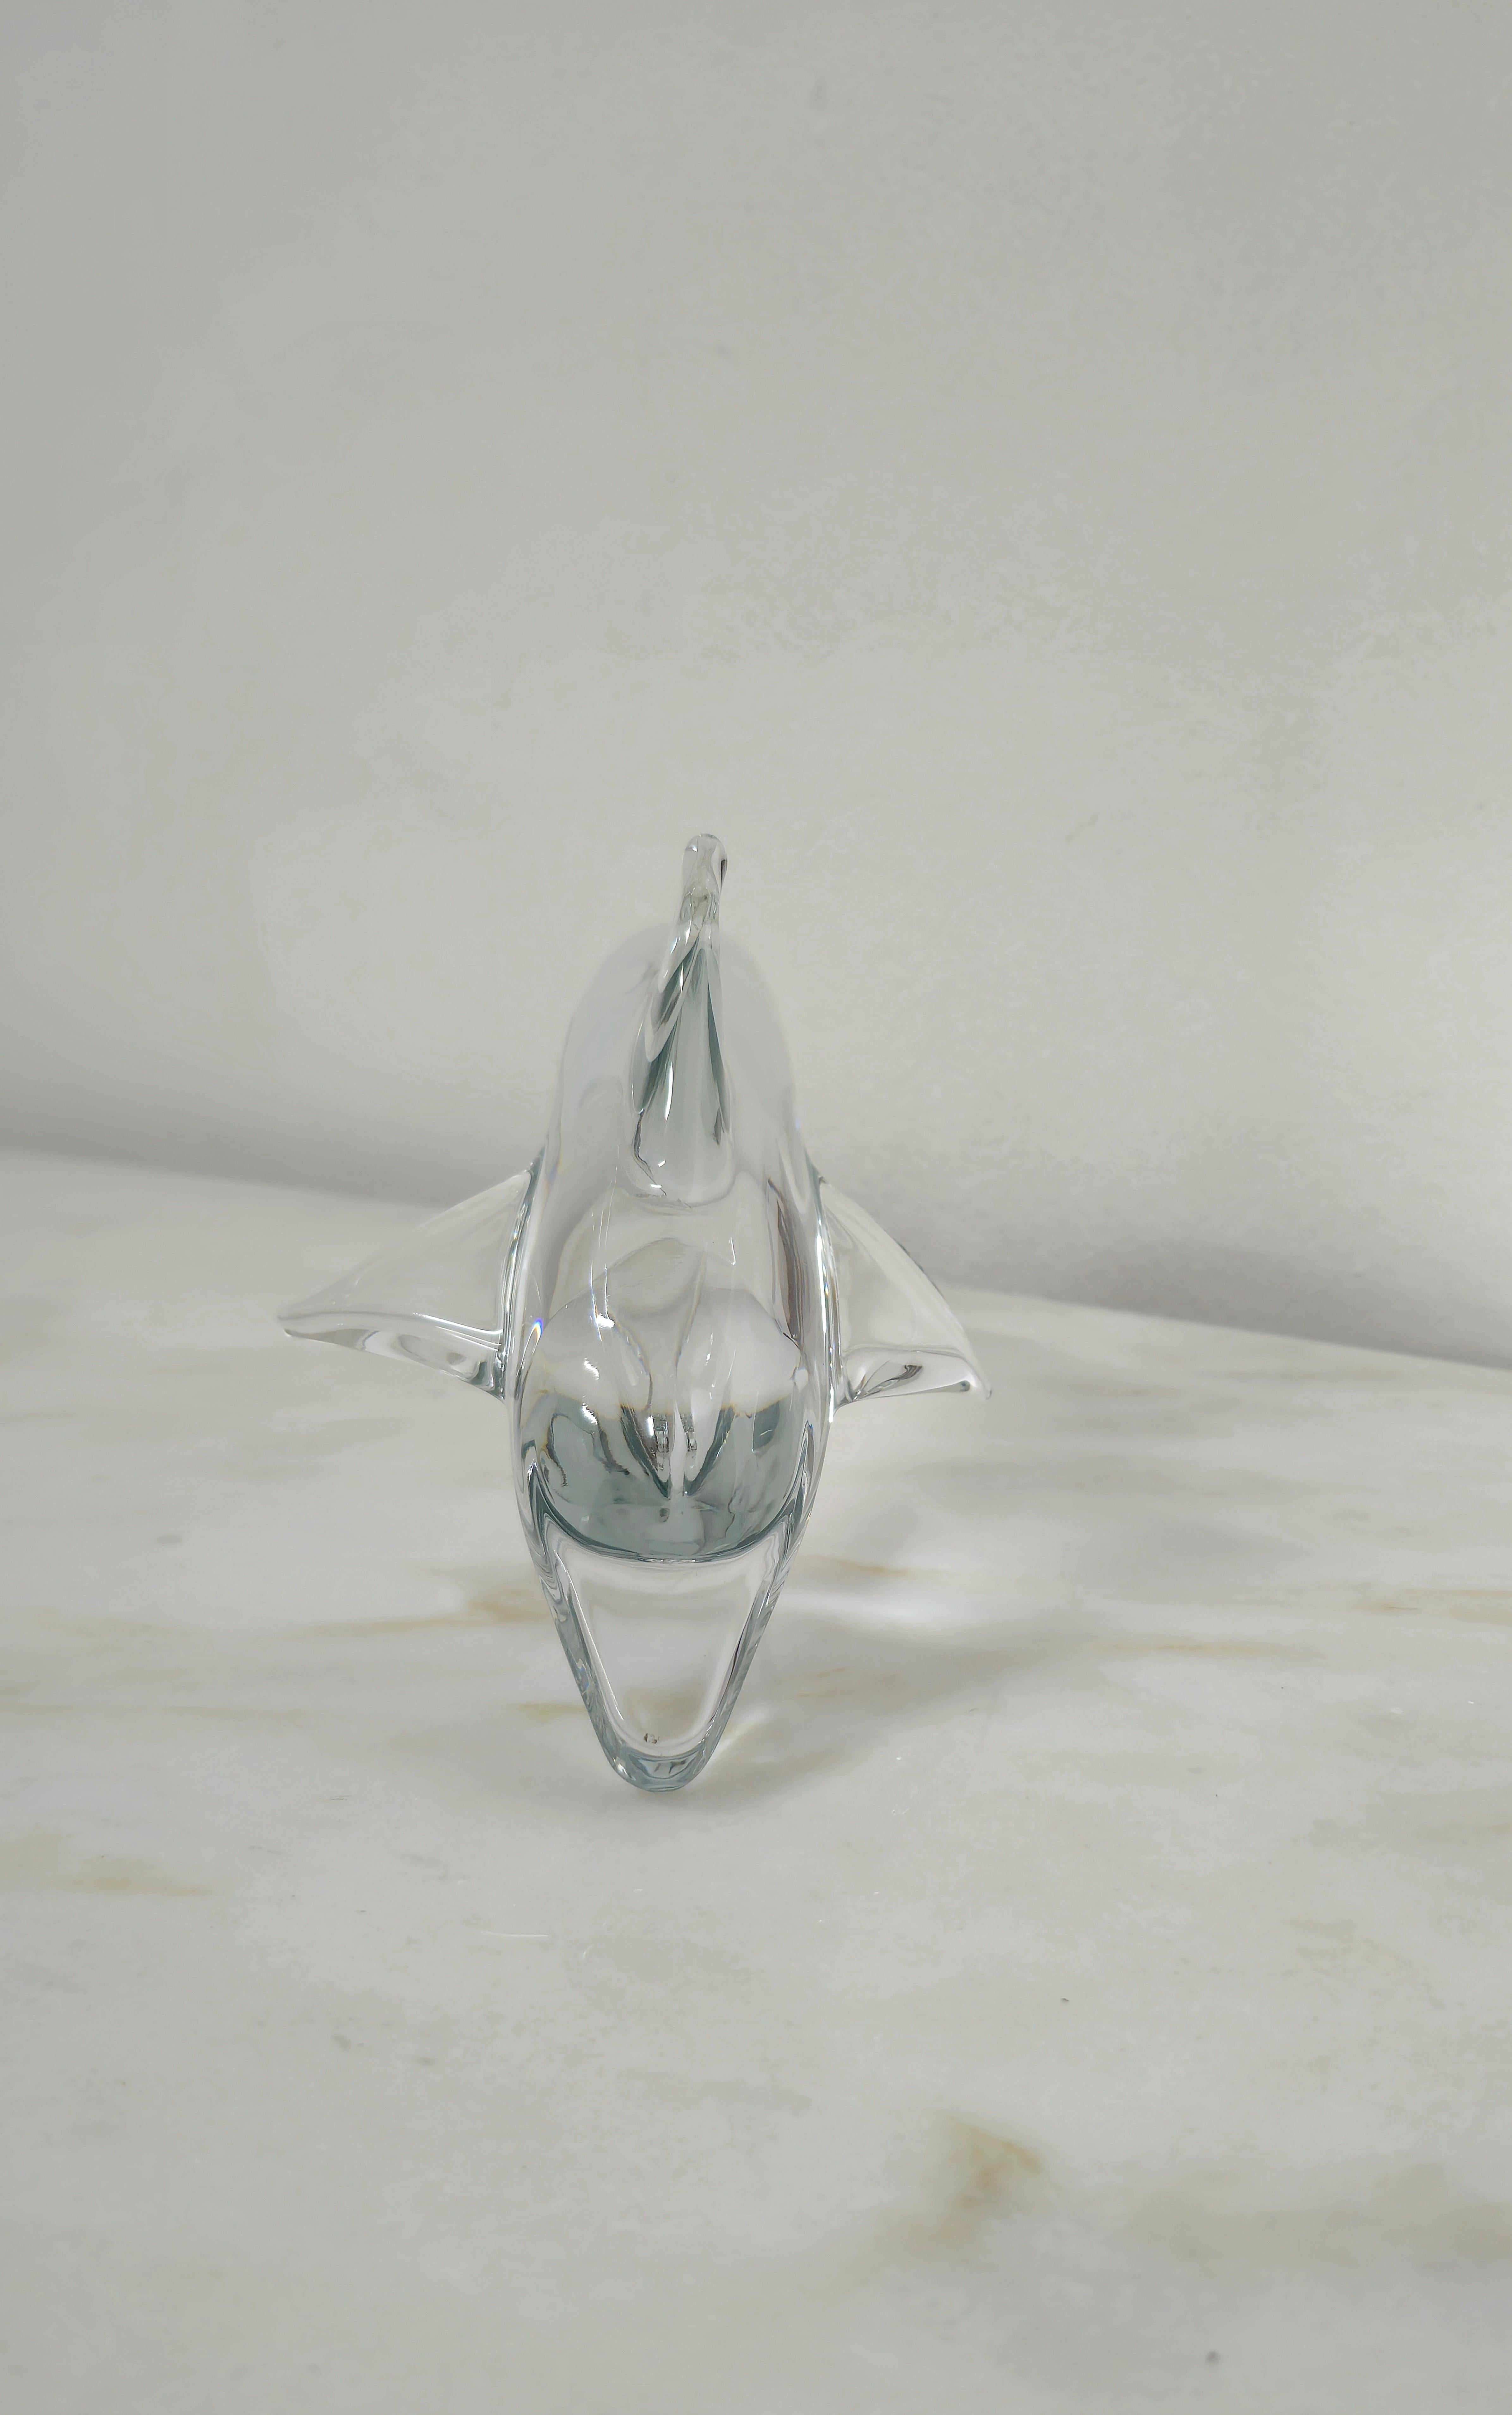 Decorative Object Animal Sculpture Crystal Glass Daum France Midcentury 1980s For Sale 3